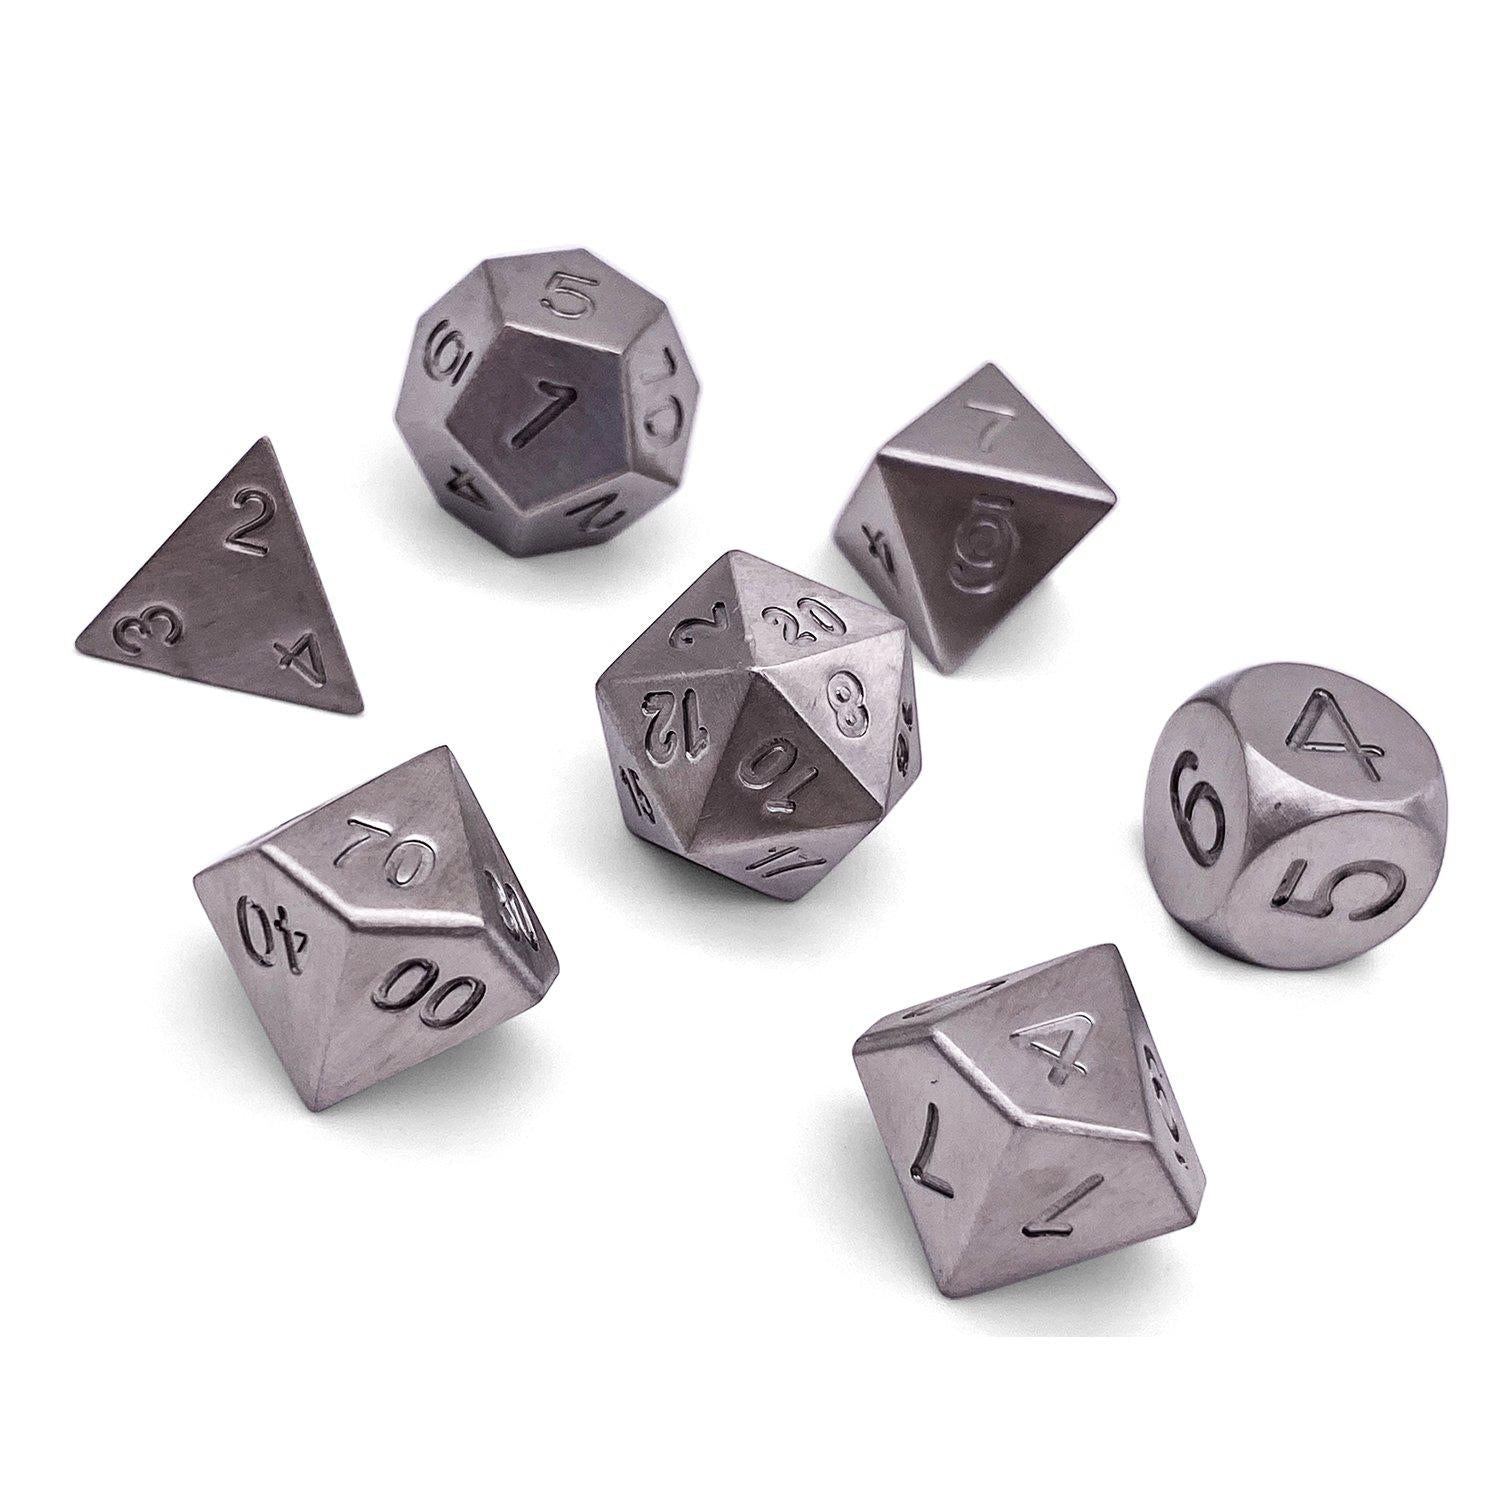 Stainless Steel - 7 Piece RPG Set True Metal Dice - Norse Foundry